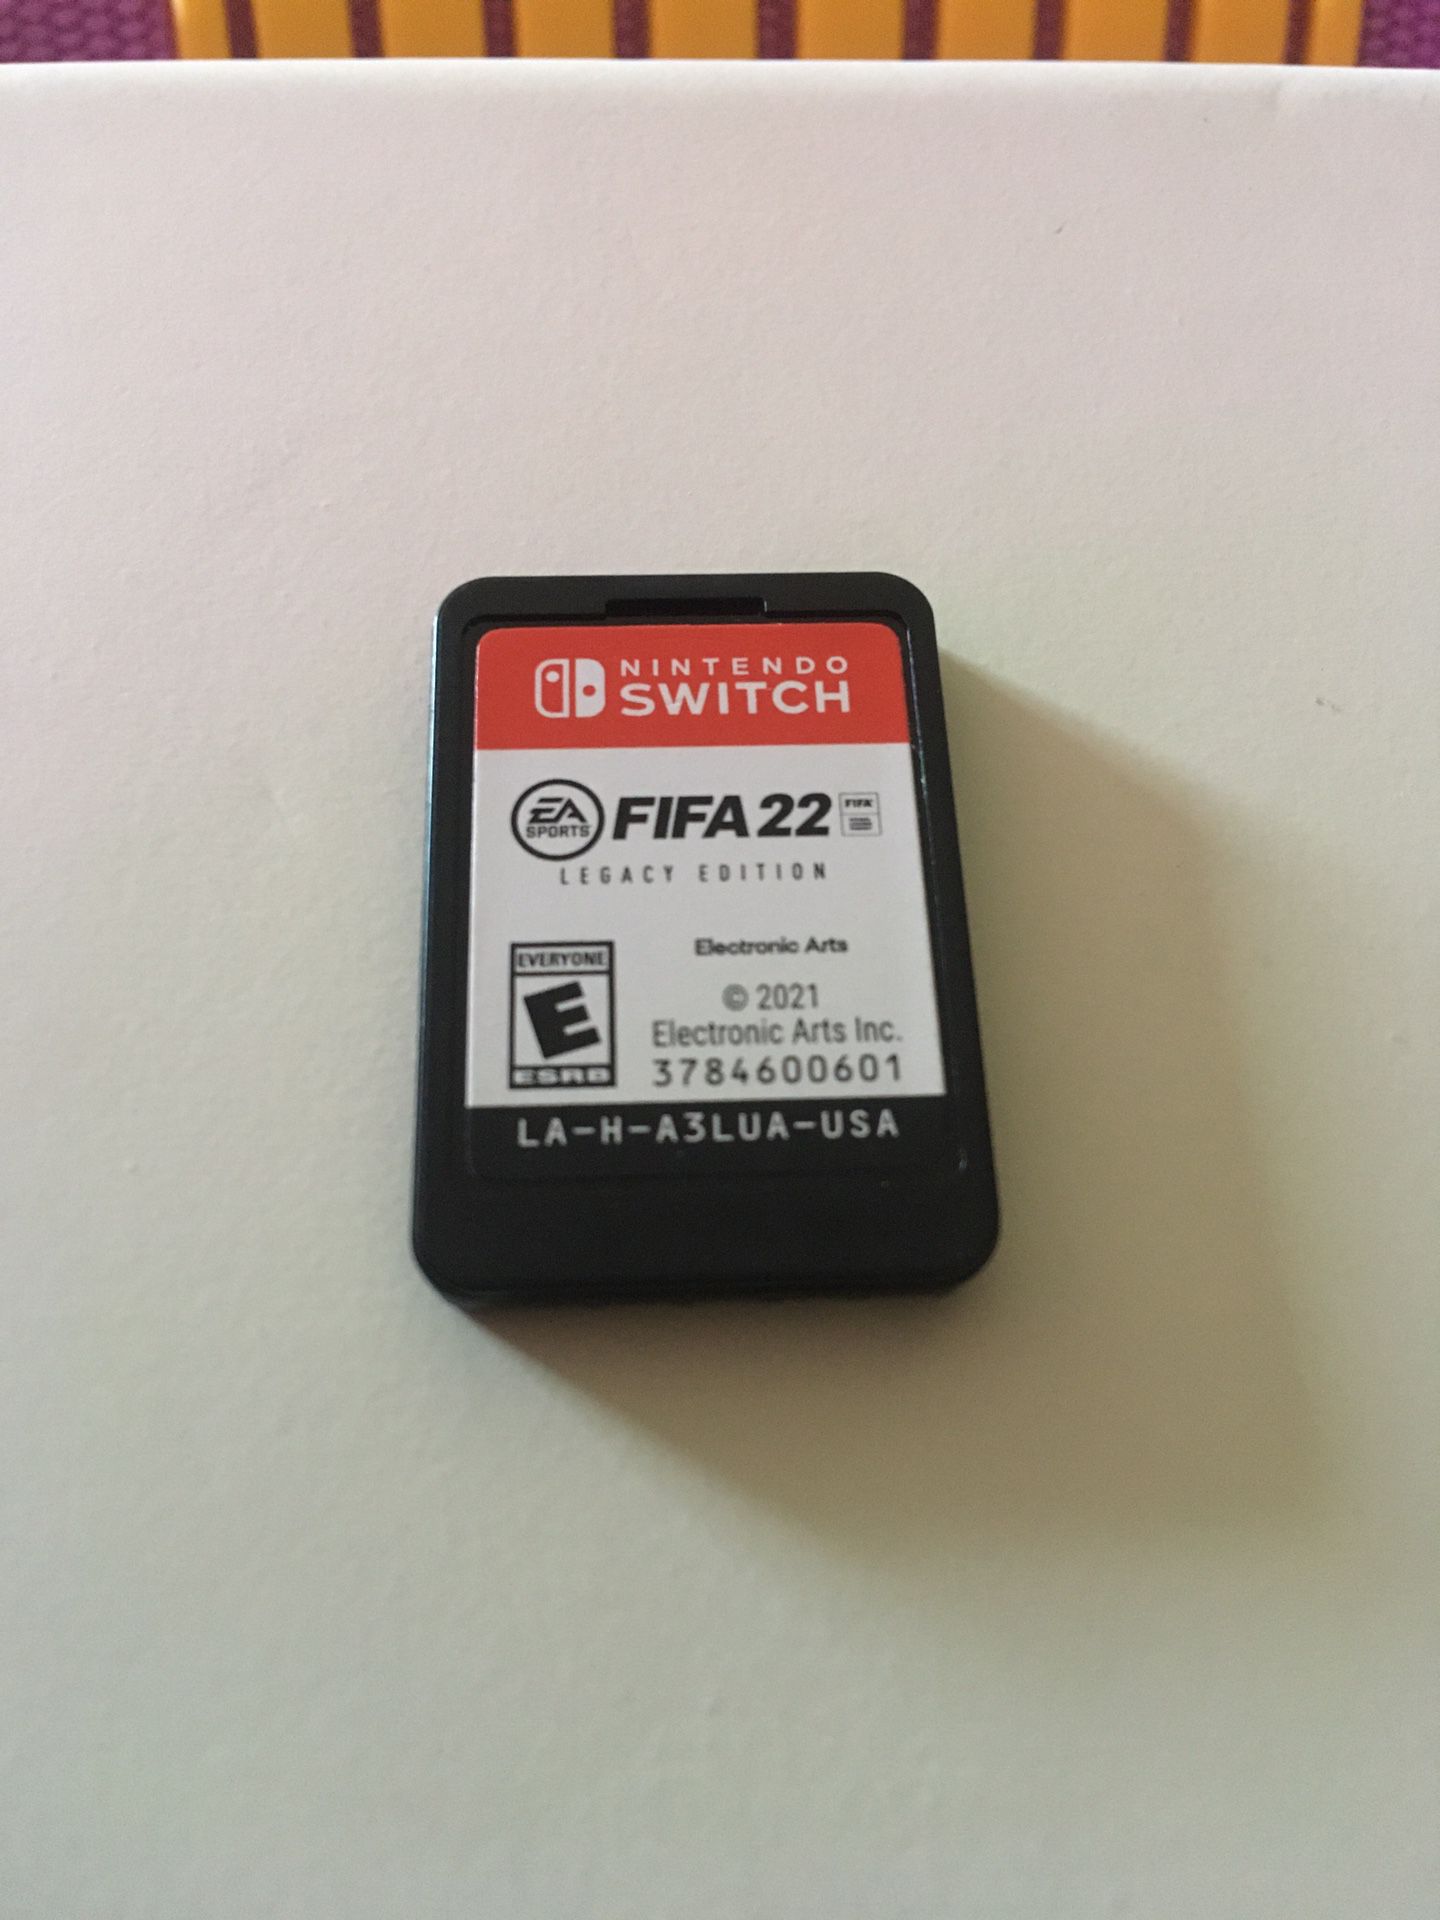 FIFA 22 LEGACY EDITION (NINTENDO SWITCH) for Sale in Gainesville, FL -  OfferUp